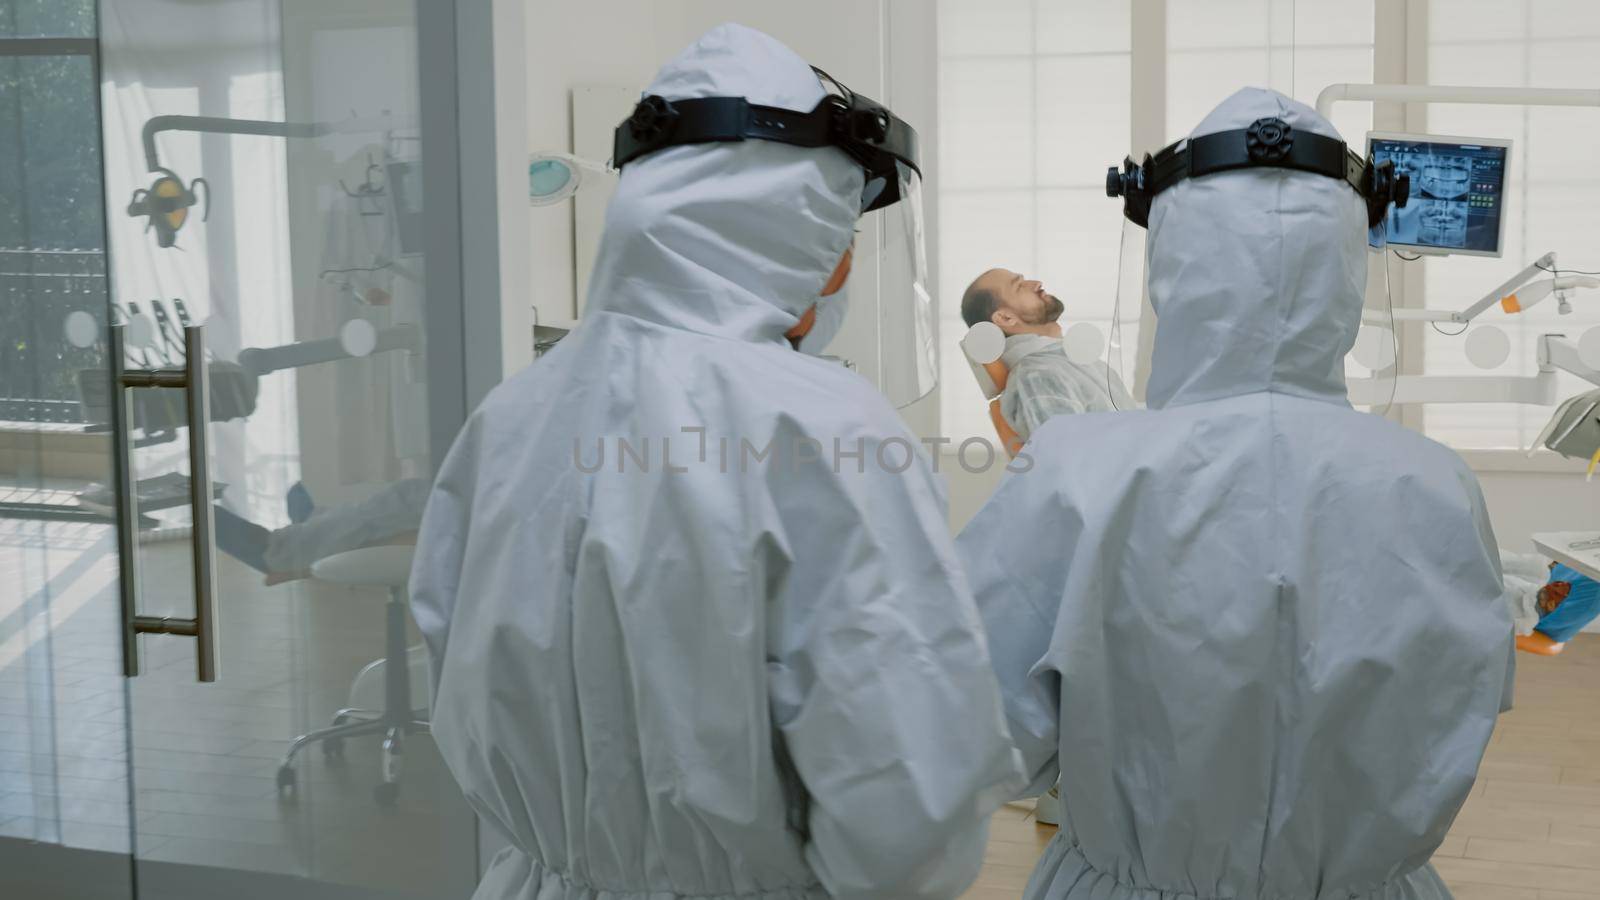 Orthodontist with ppe suit preparing for patient consultation using dental equipment and tools in oral cabinet. Dentist talking to assistant before starting teethcare examination